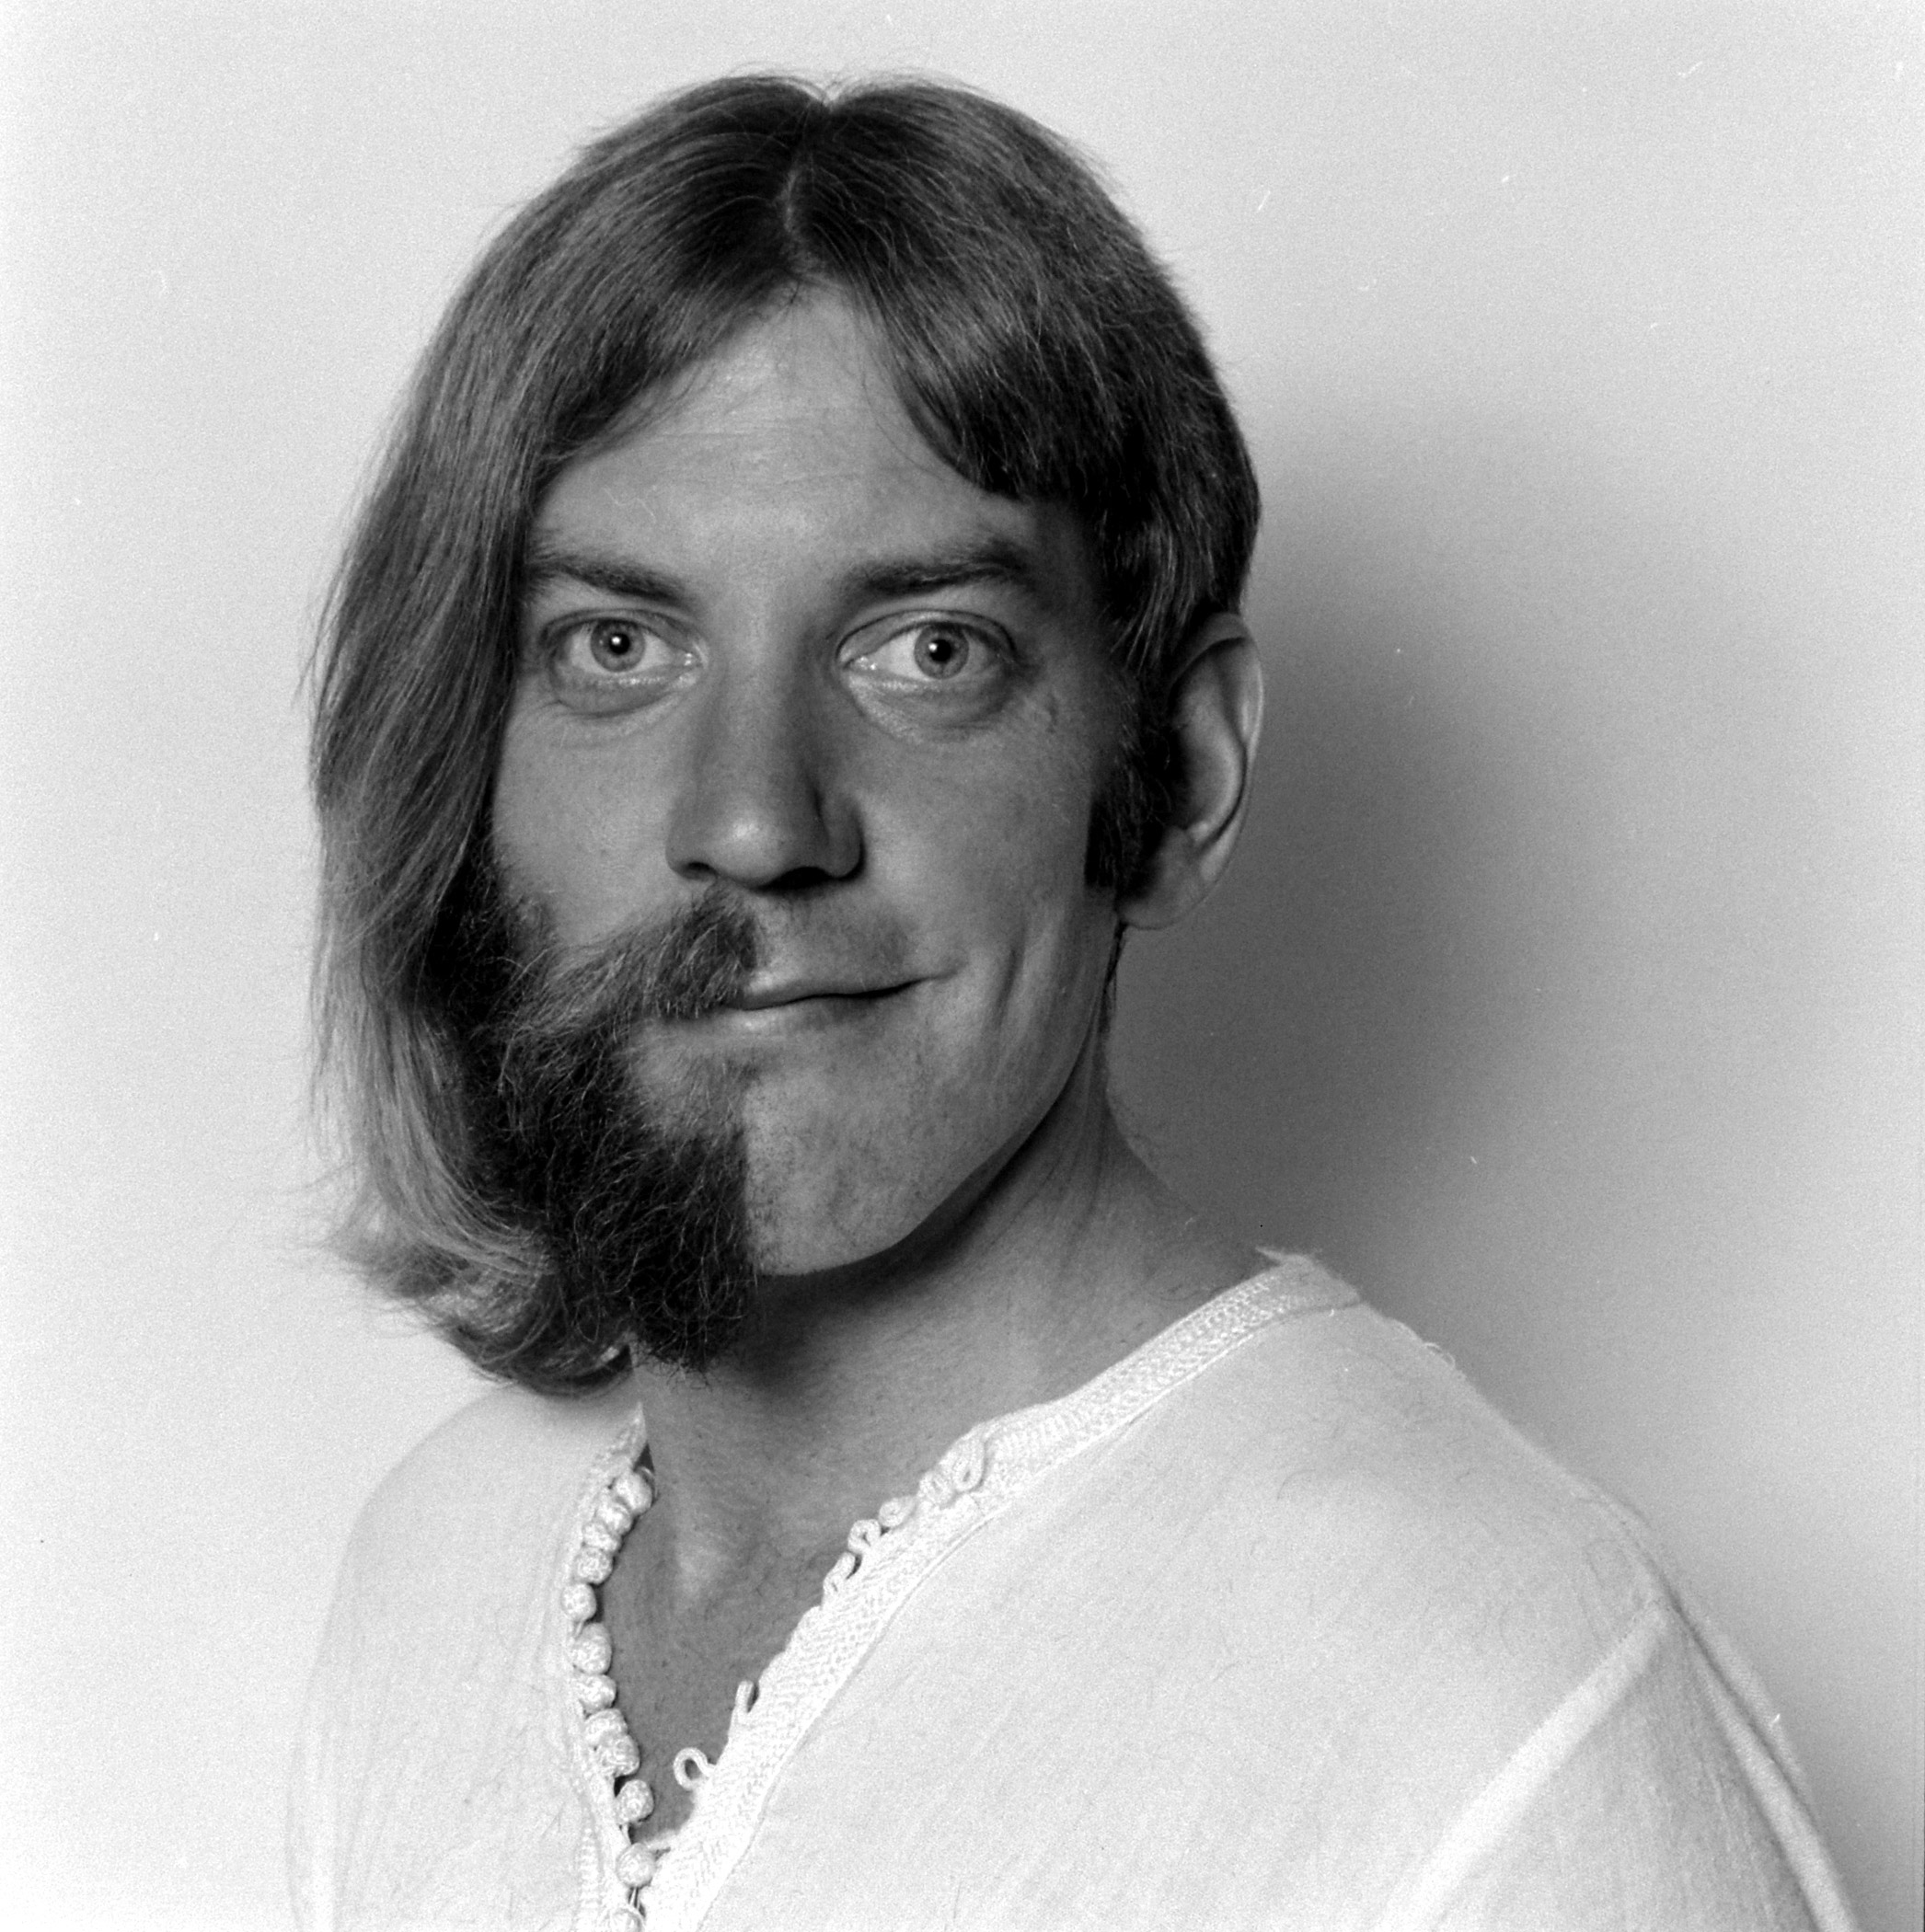 Humorous portrait of half shaved actor Donald Sutherland.